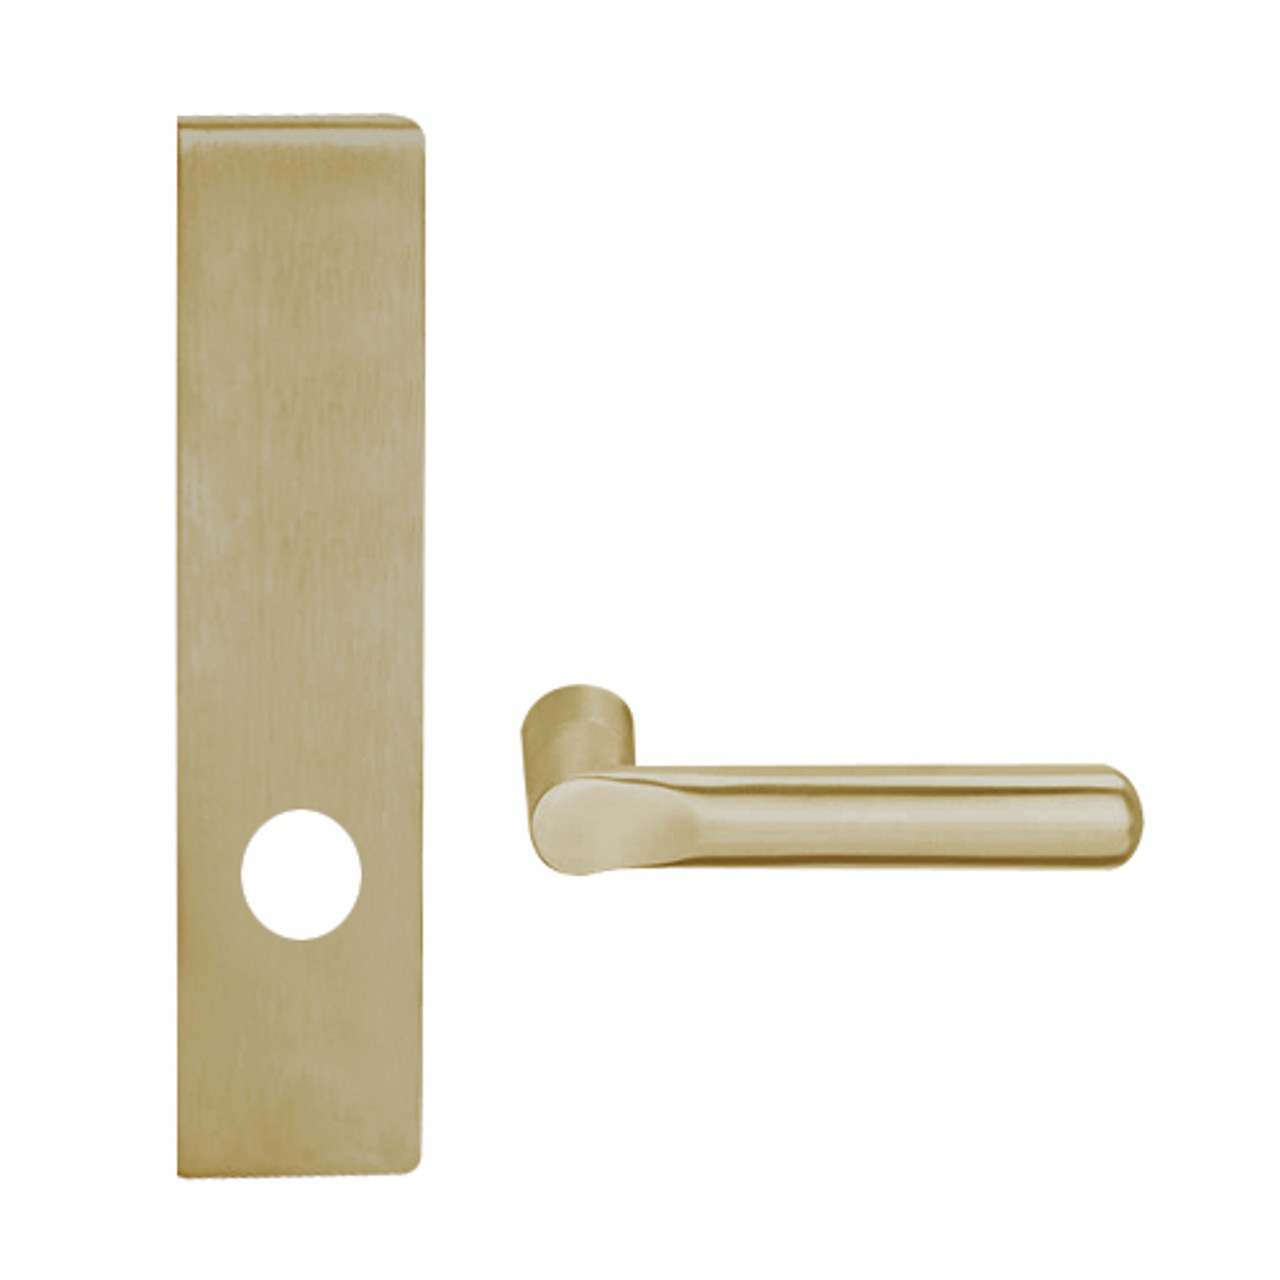 L9010-18L-612 Schlage L Series Passage Latch Commercial Mortise Lock with 18 Cast Lever Design in Satin Bronze